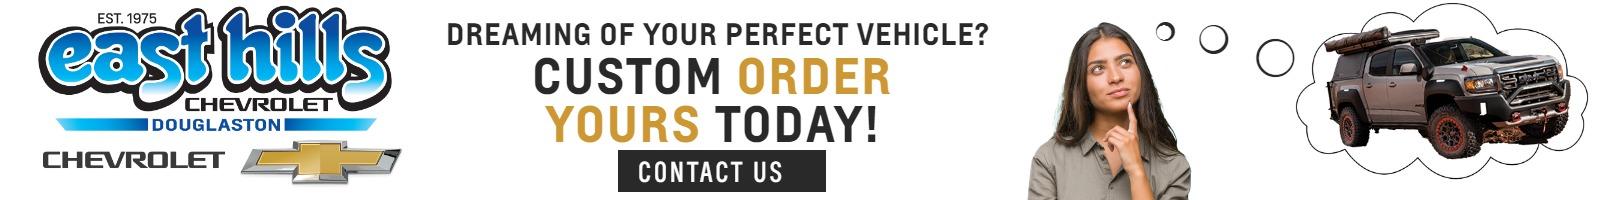 Dreaming of your perfect Chevrolet?
Order Yours Today!